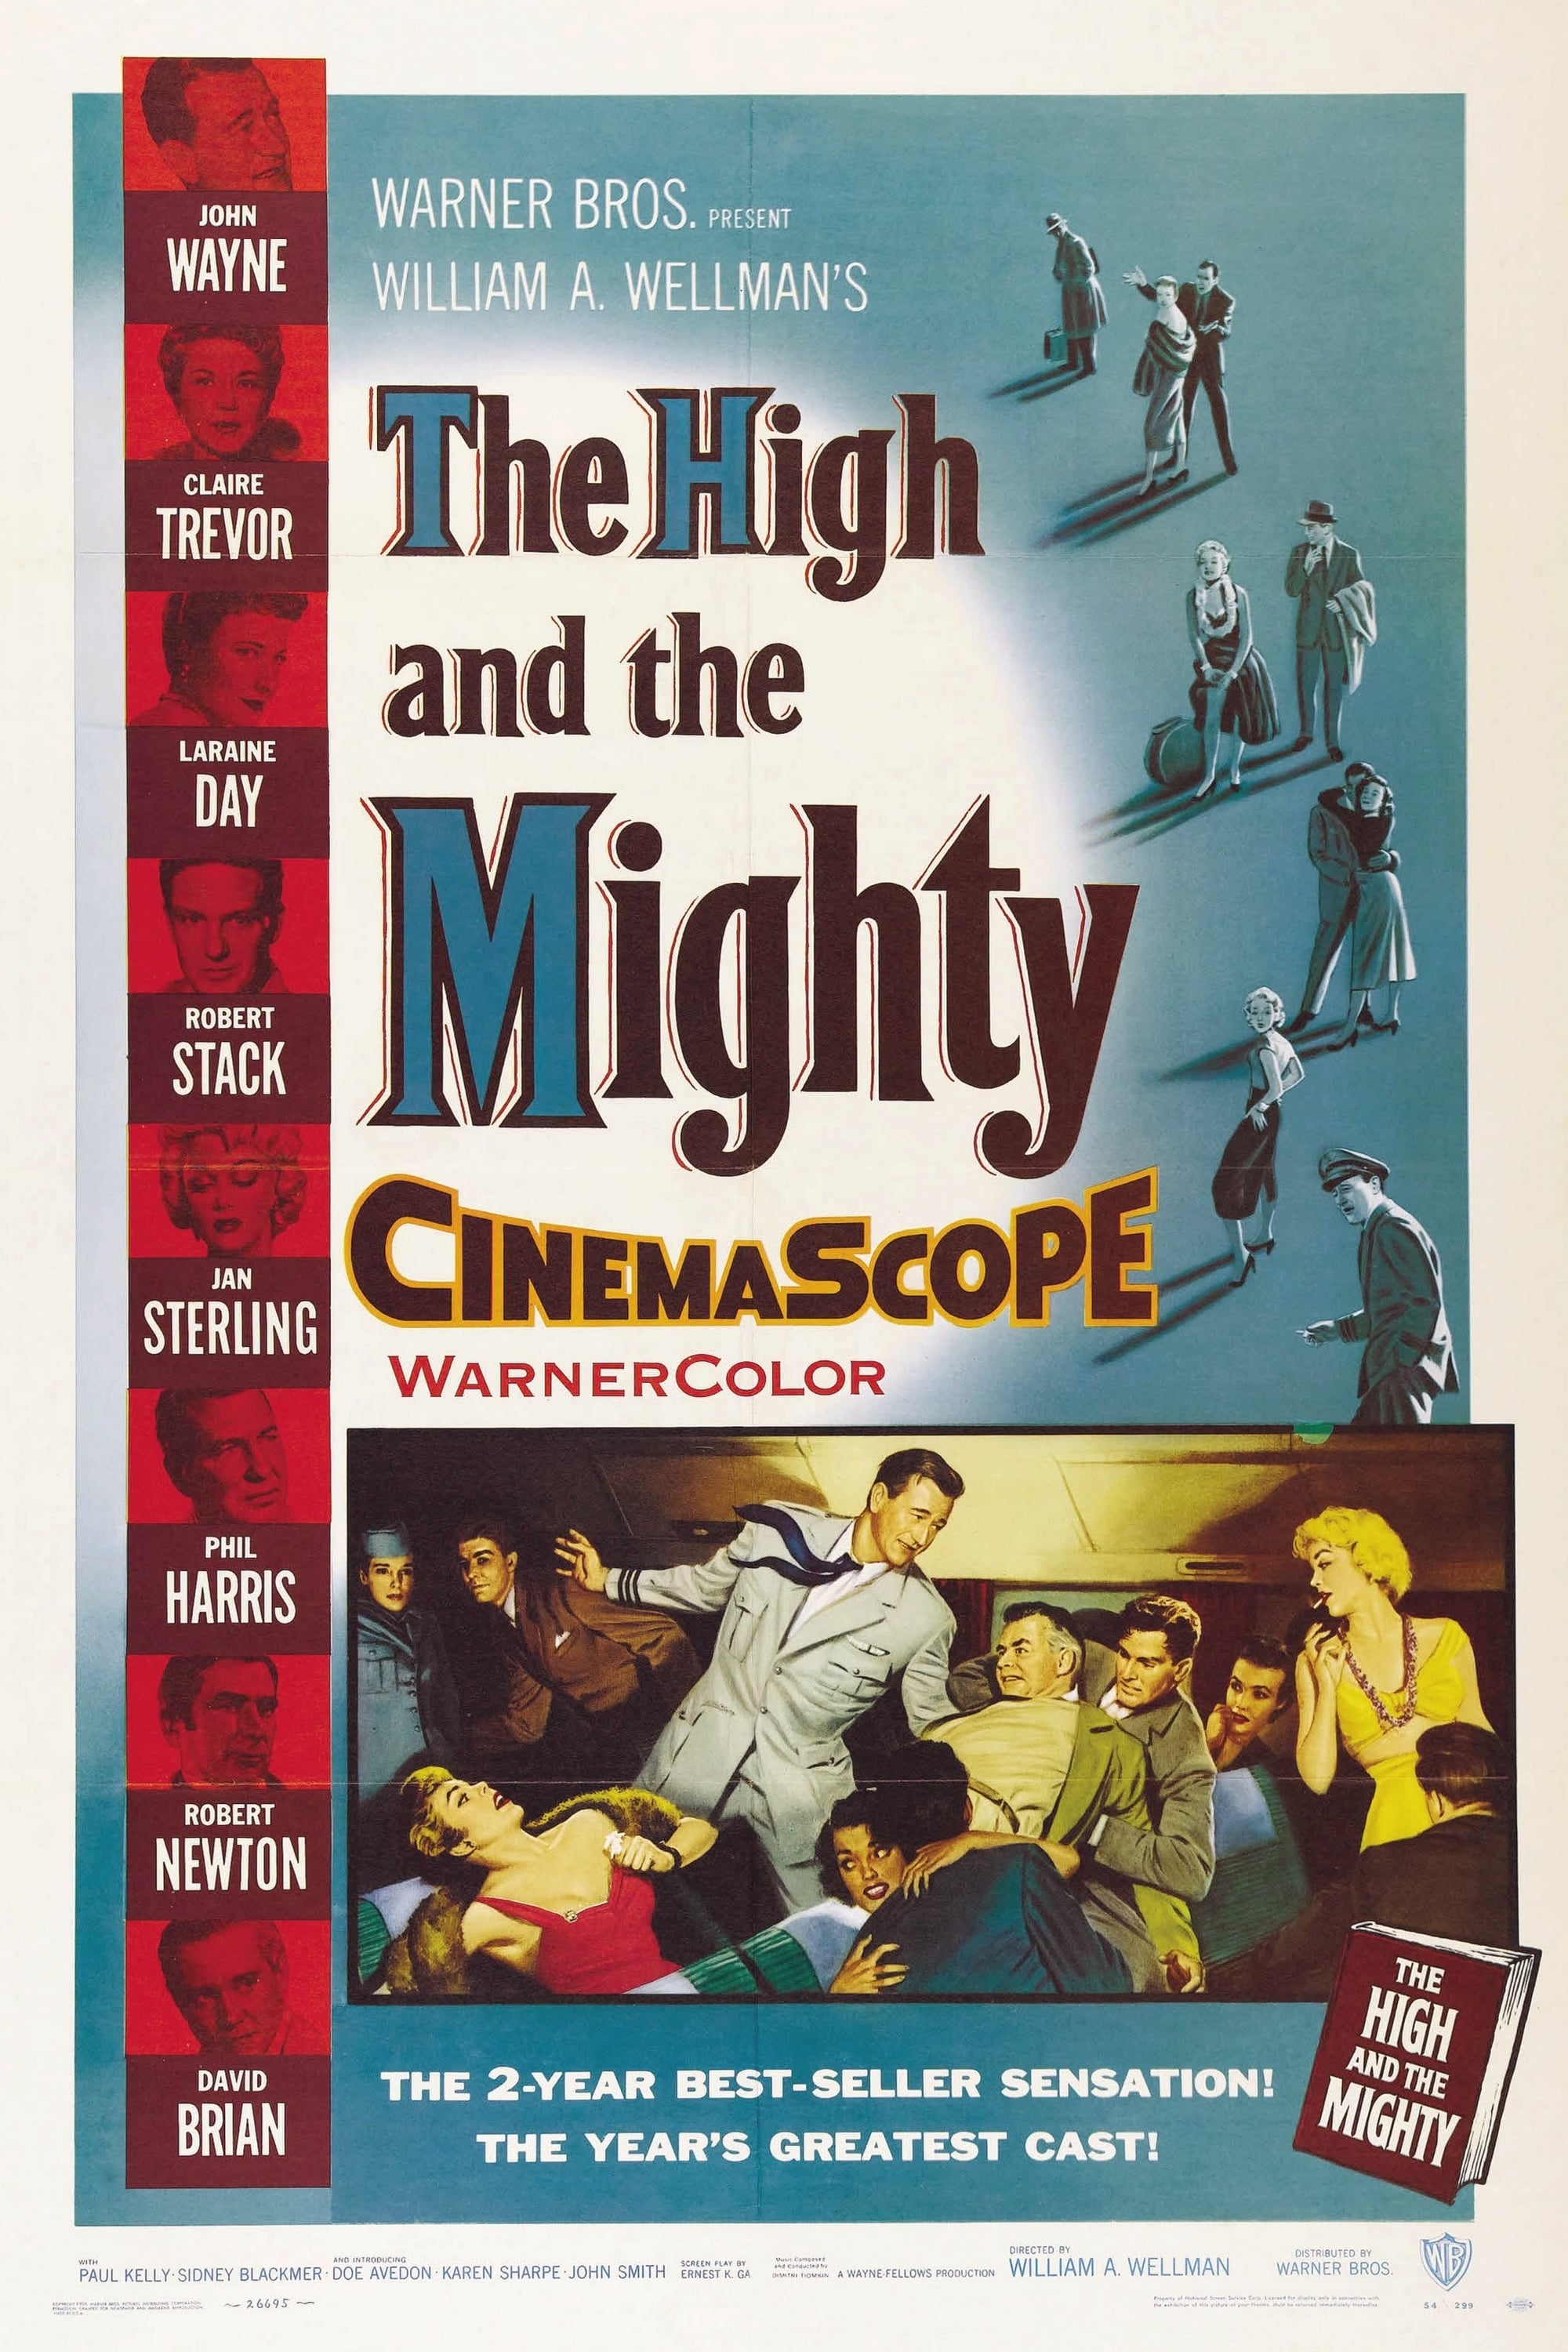 The High and the Mighty (1954)